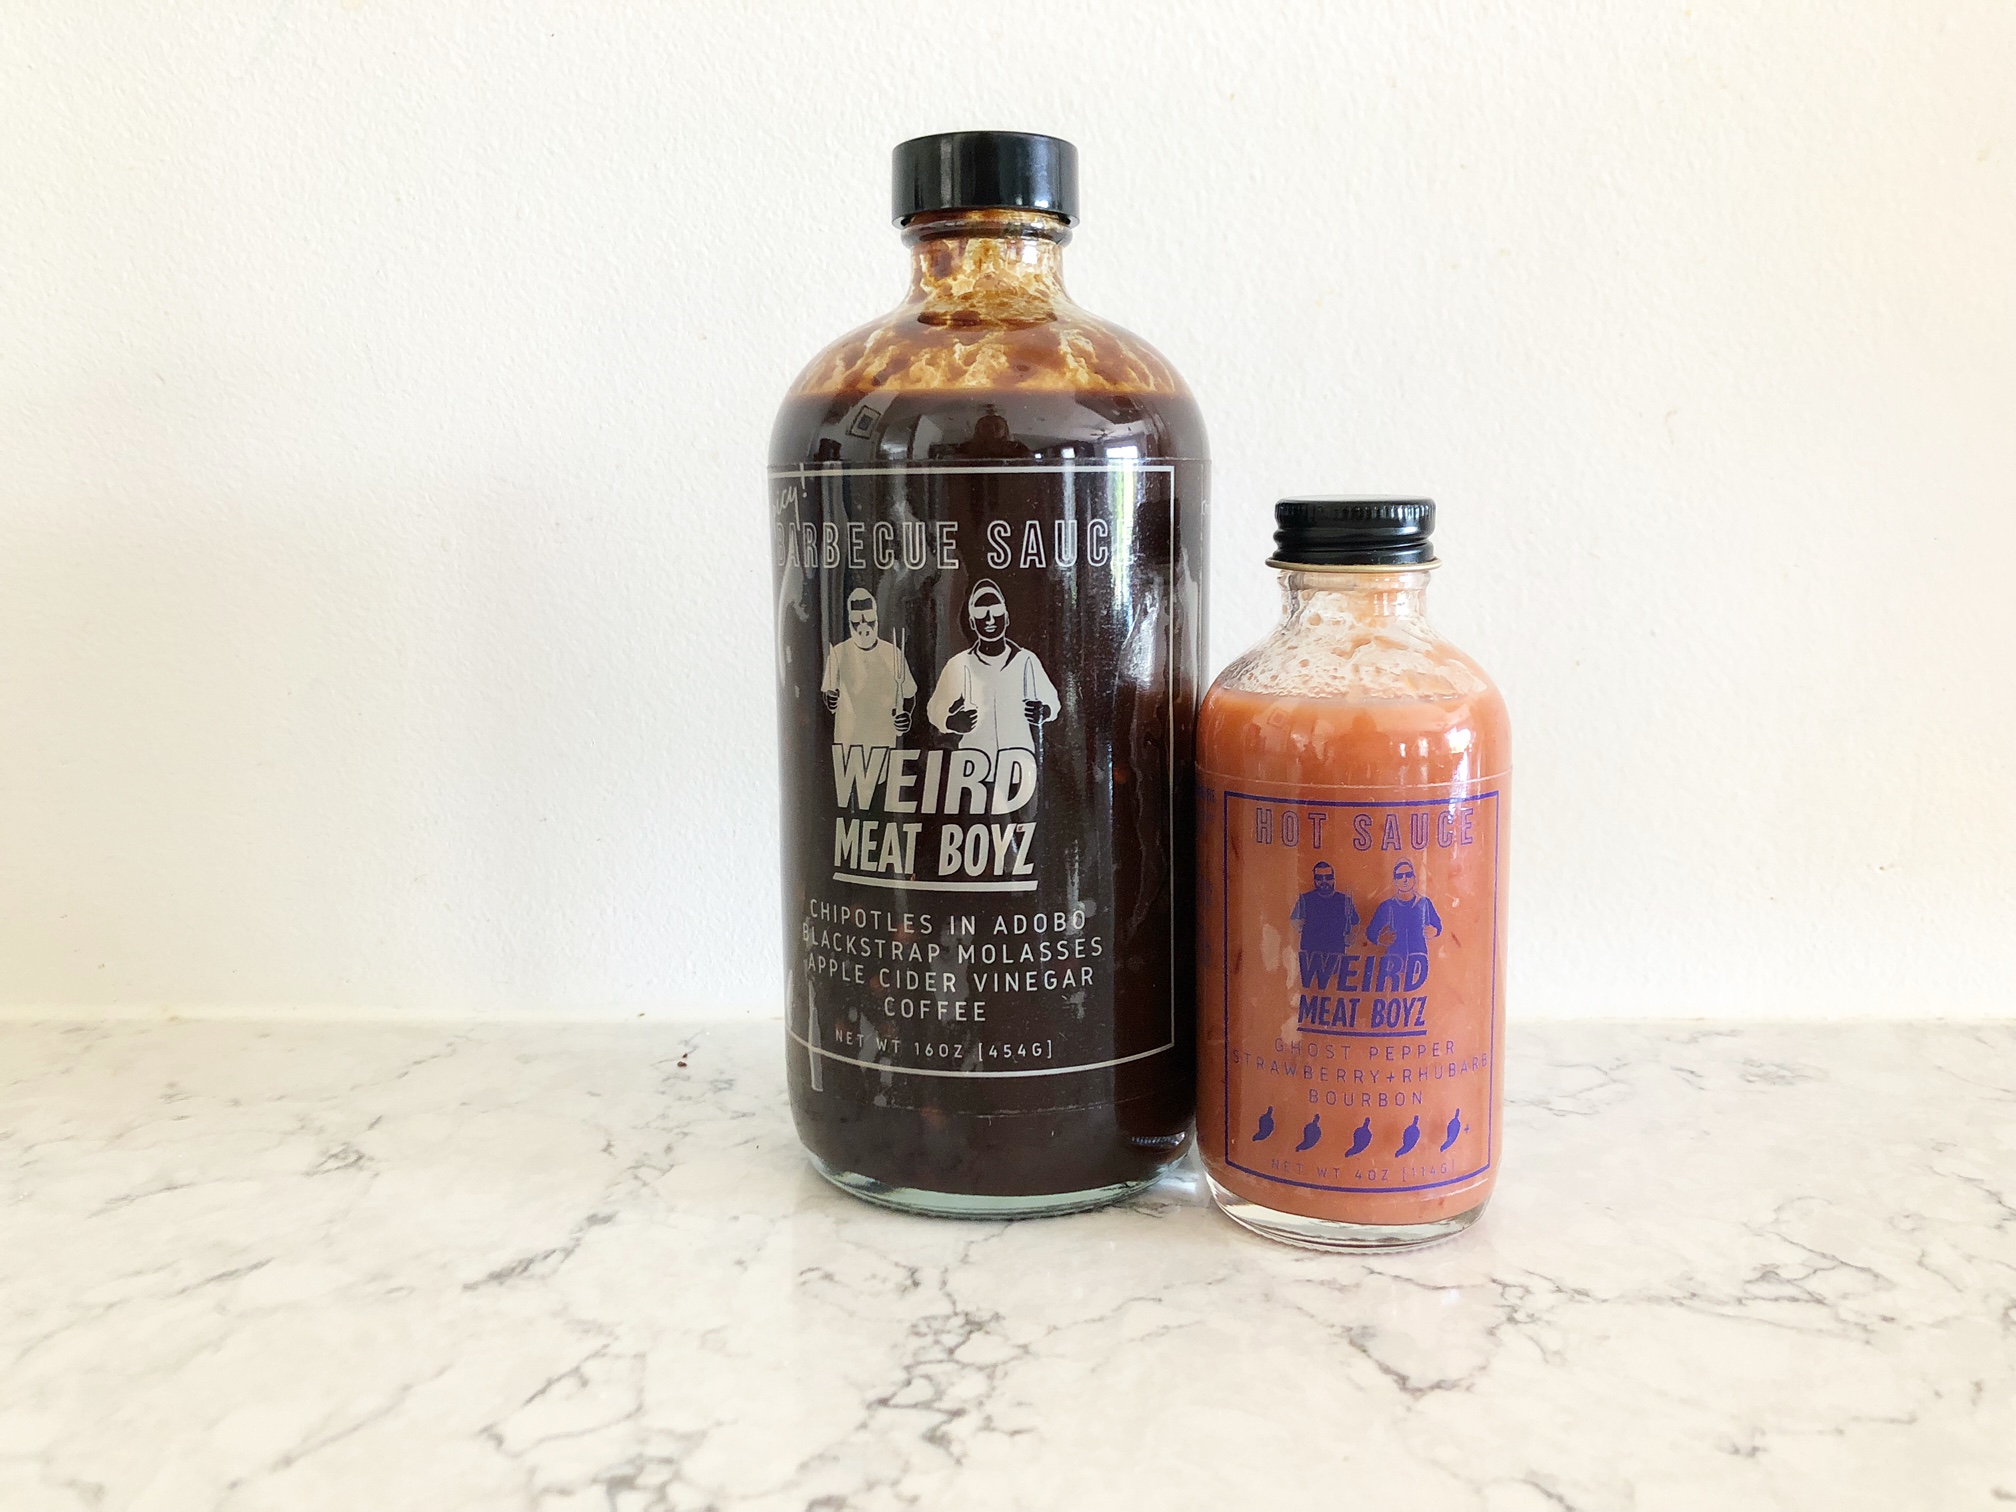 On a white counter in front of a white wall, there are two glass bottles of sauce. One is the barbecue sauce and the other is the ghost pepper sauce by Weird Meat Boyz. Photo by Alyssa Buckley.